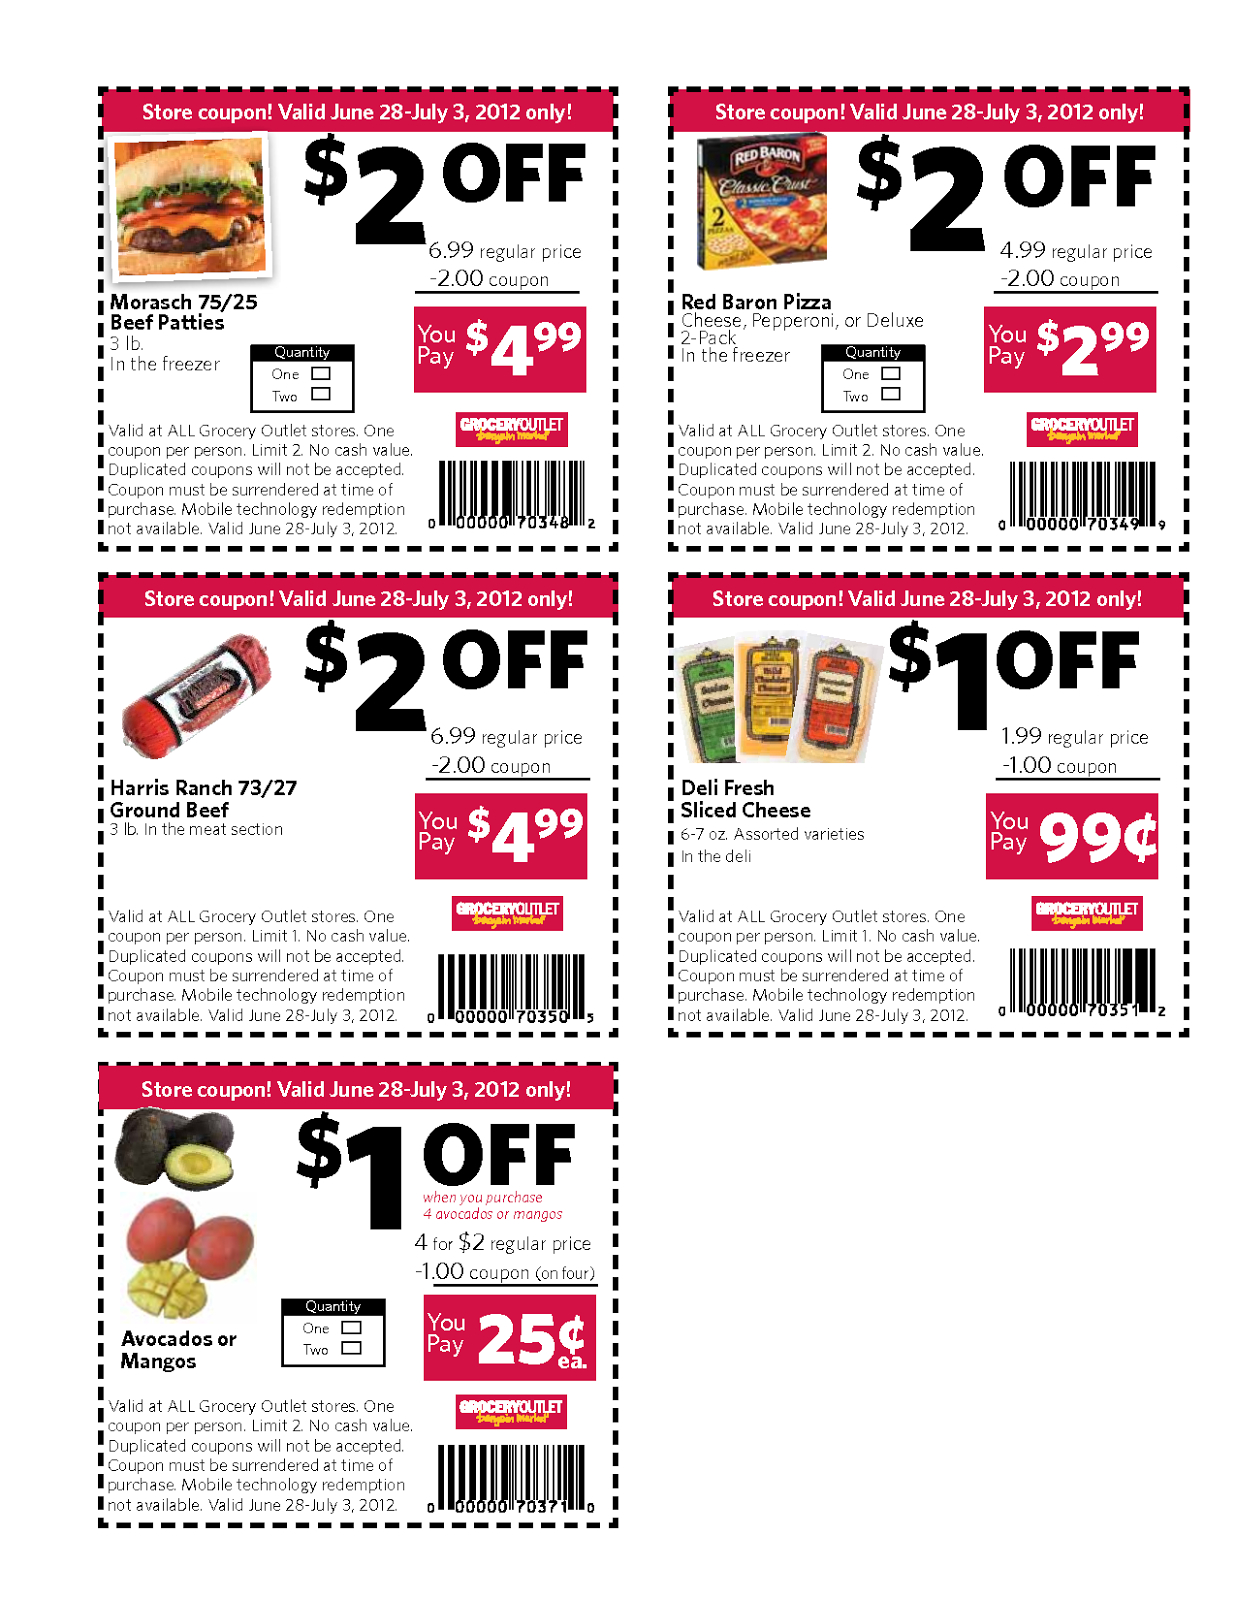 Printable Grocery Coupons Manufacturer Free Printable Templates